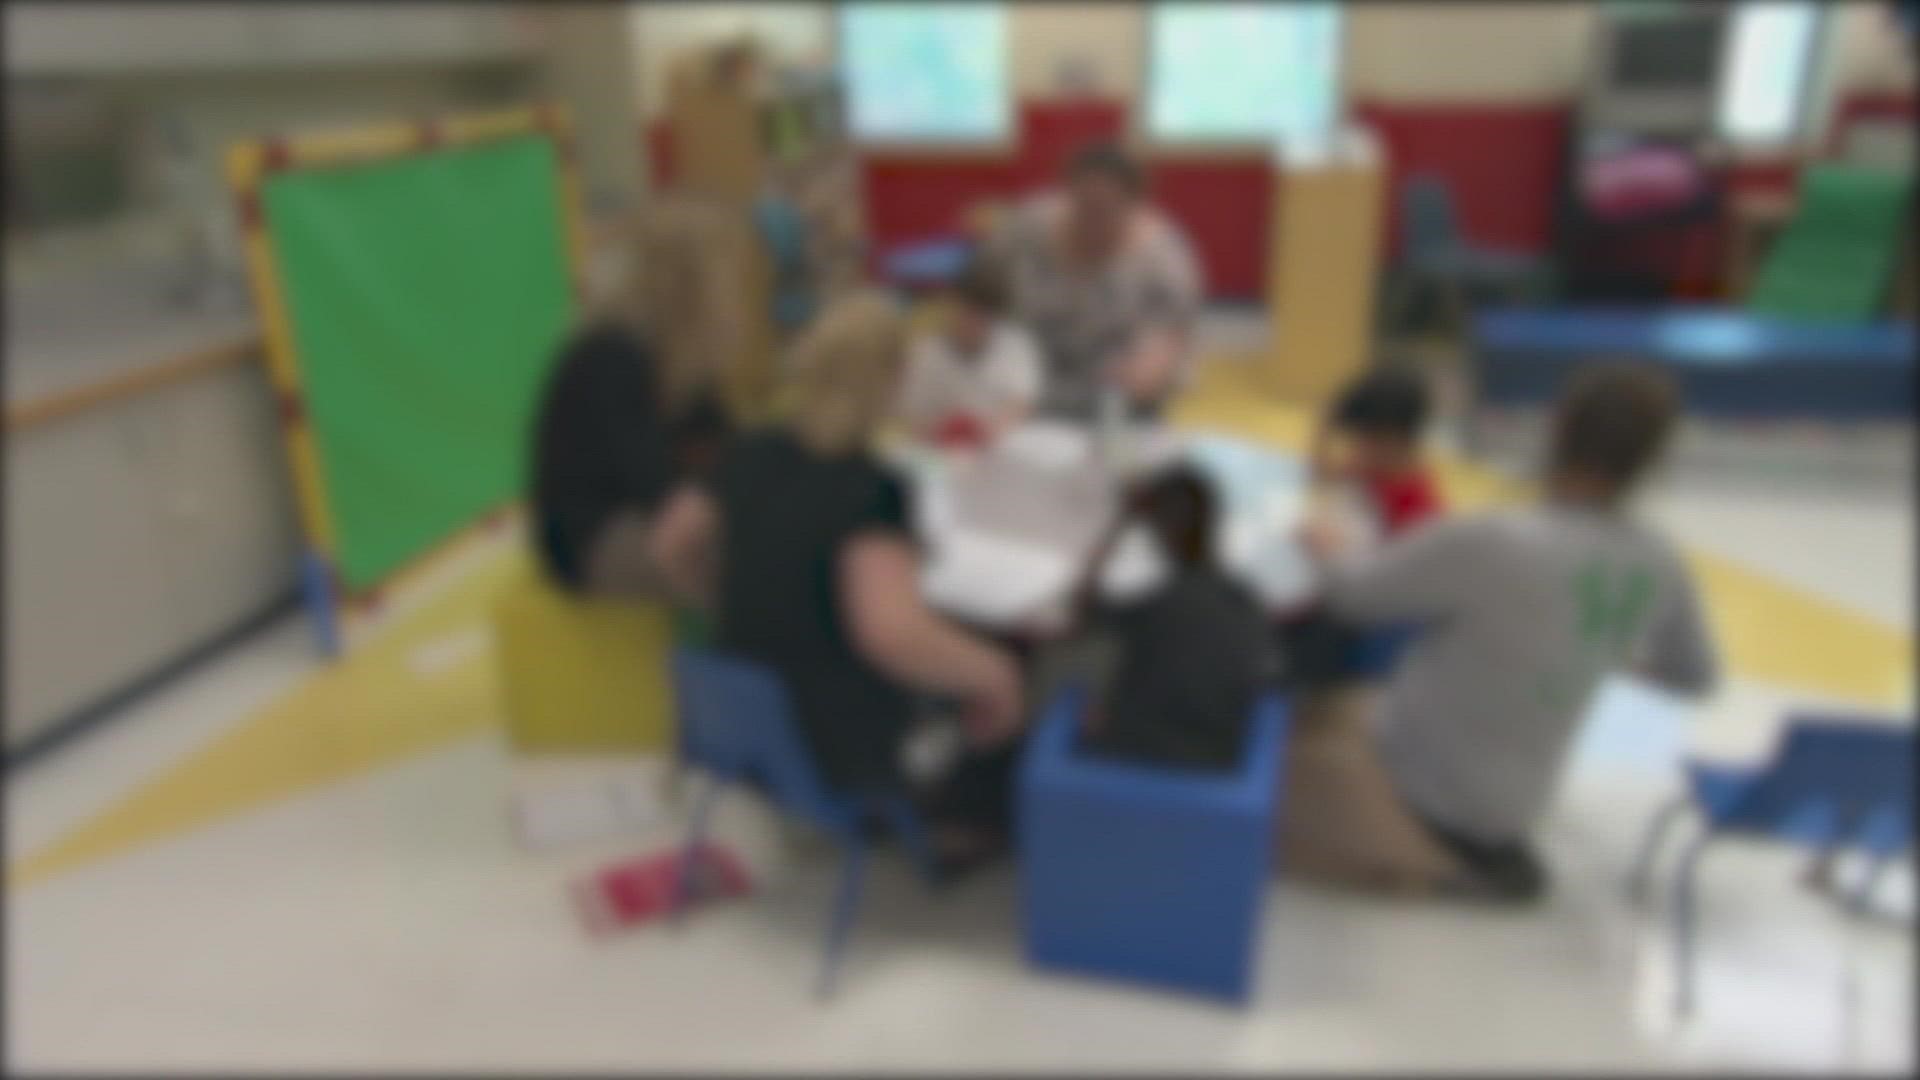 There are nearly 400 special education positions open in Tennessee.